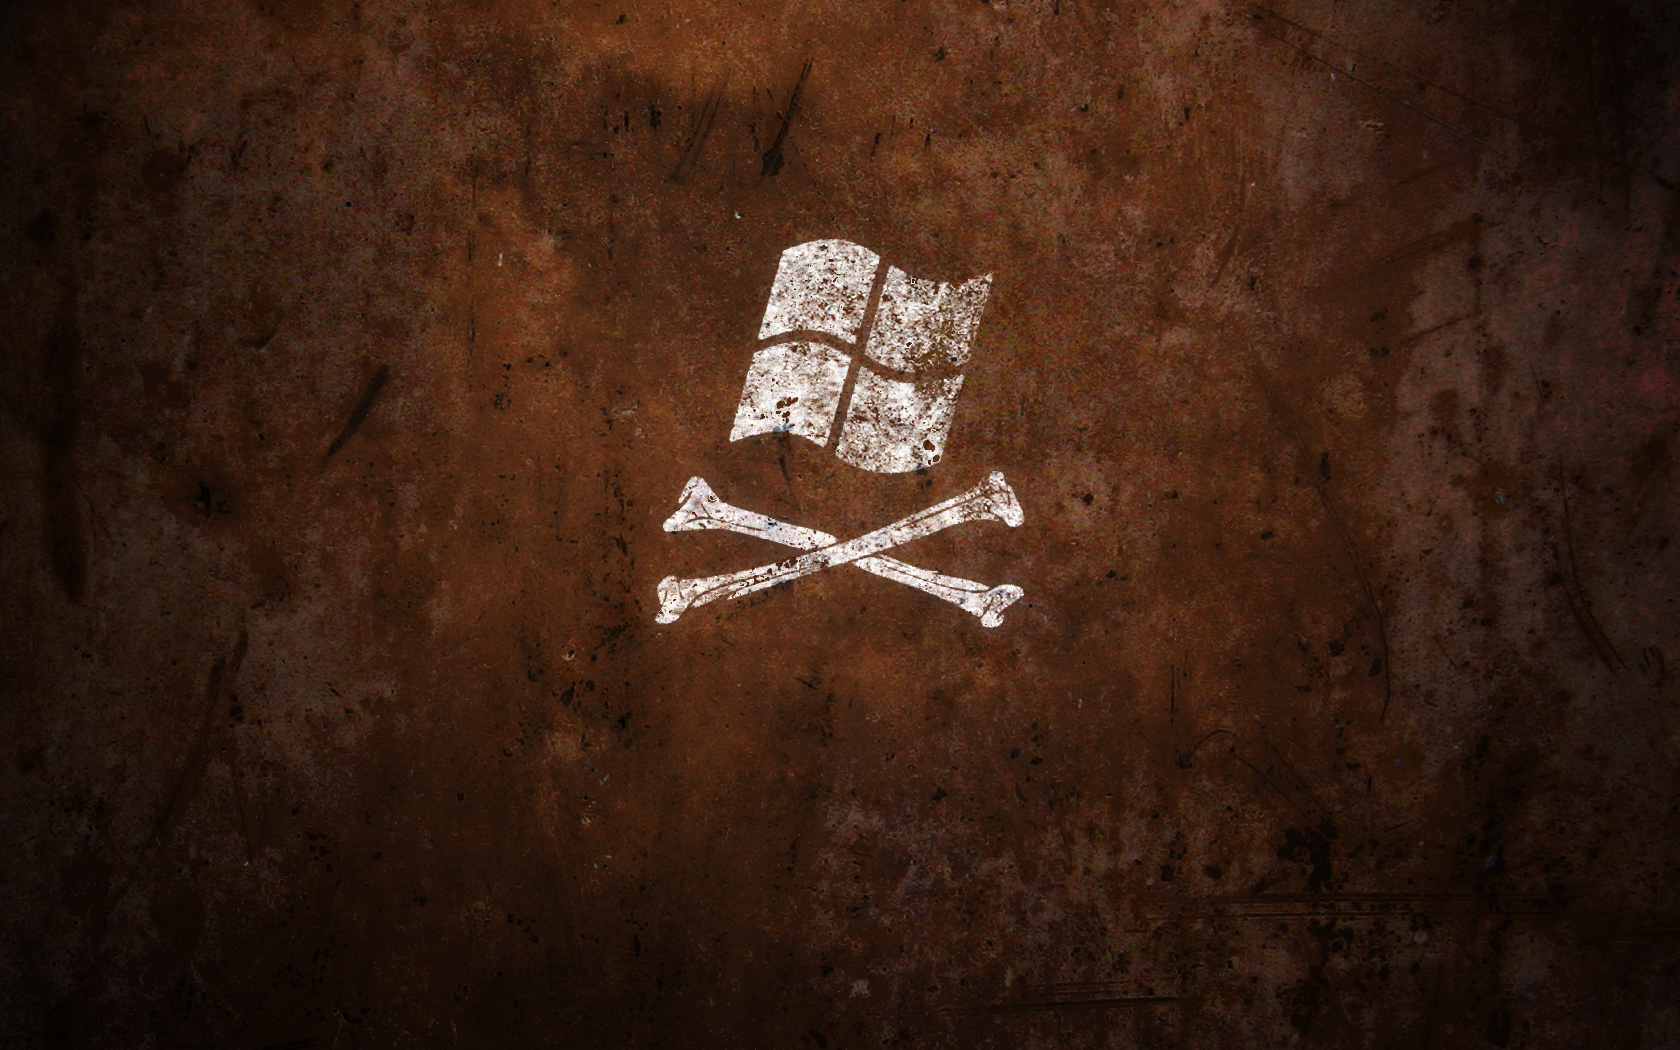 Windows Wallpaper And Background Image - Windows Pirate , HD Wallpaper & Backgrounds